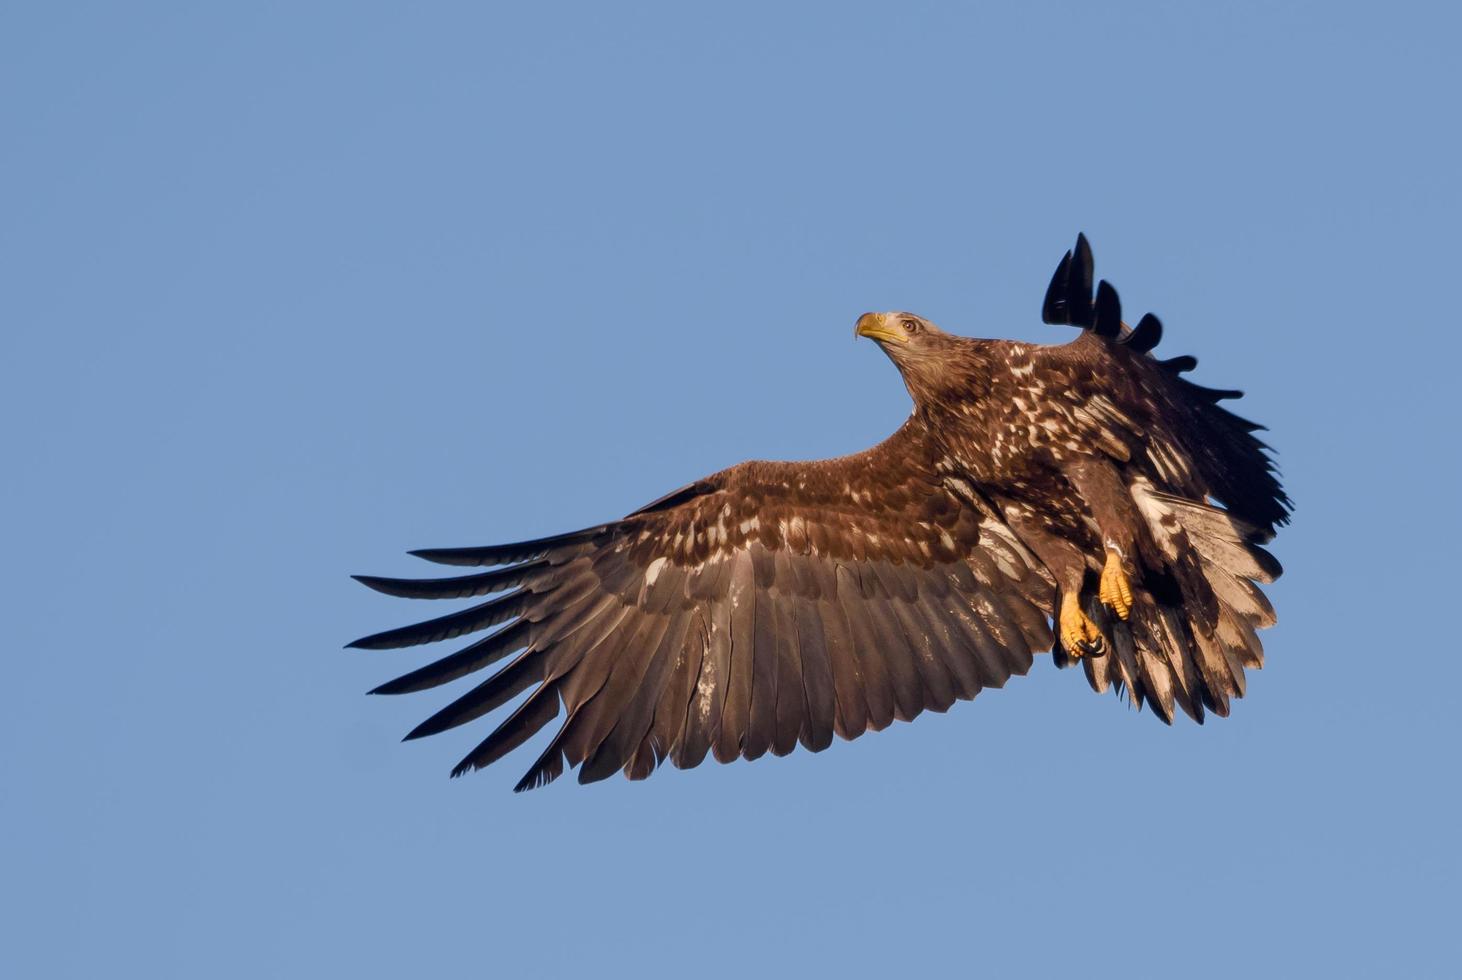 Young White-tailed eagle - Haliaeetus albicilla - makes sharp turn in flight while stopping in blue sky photo